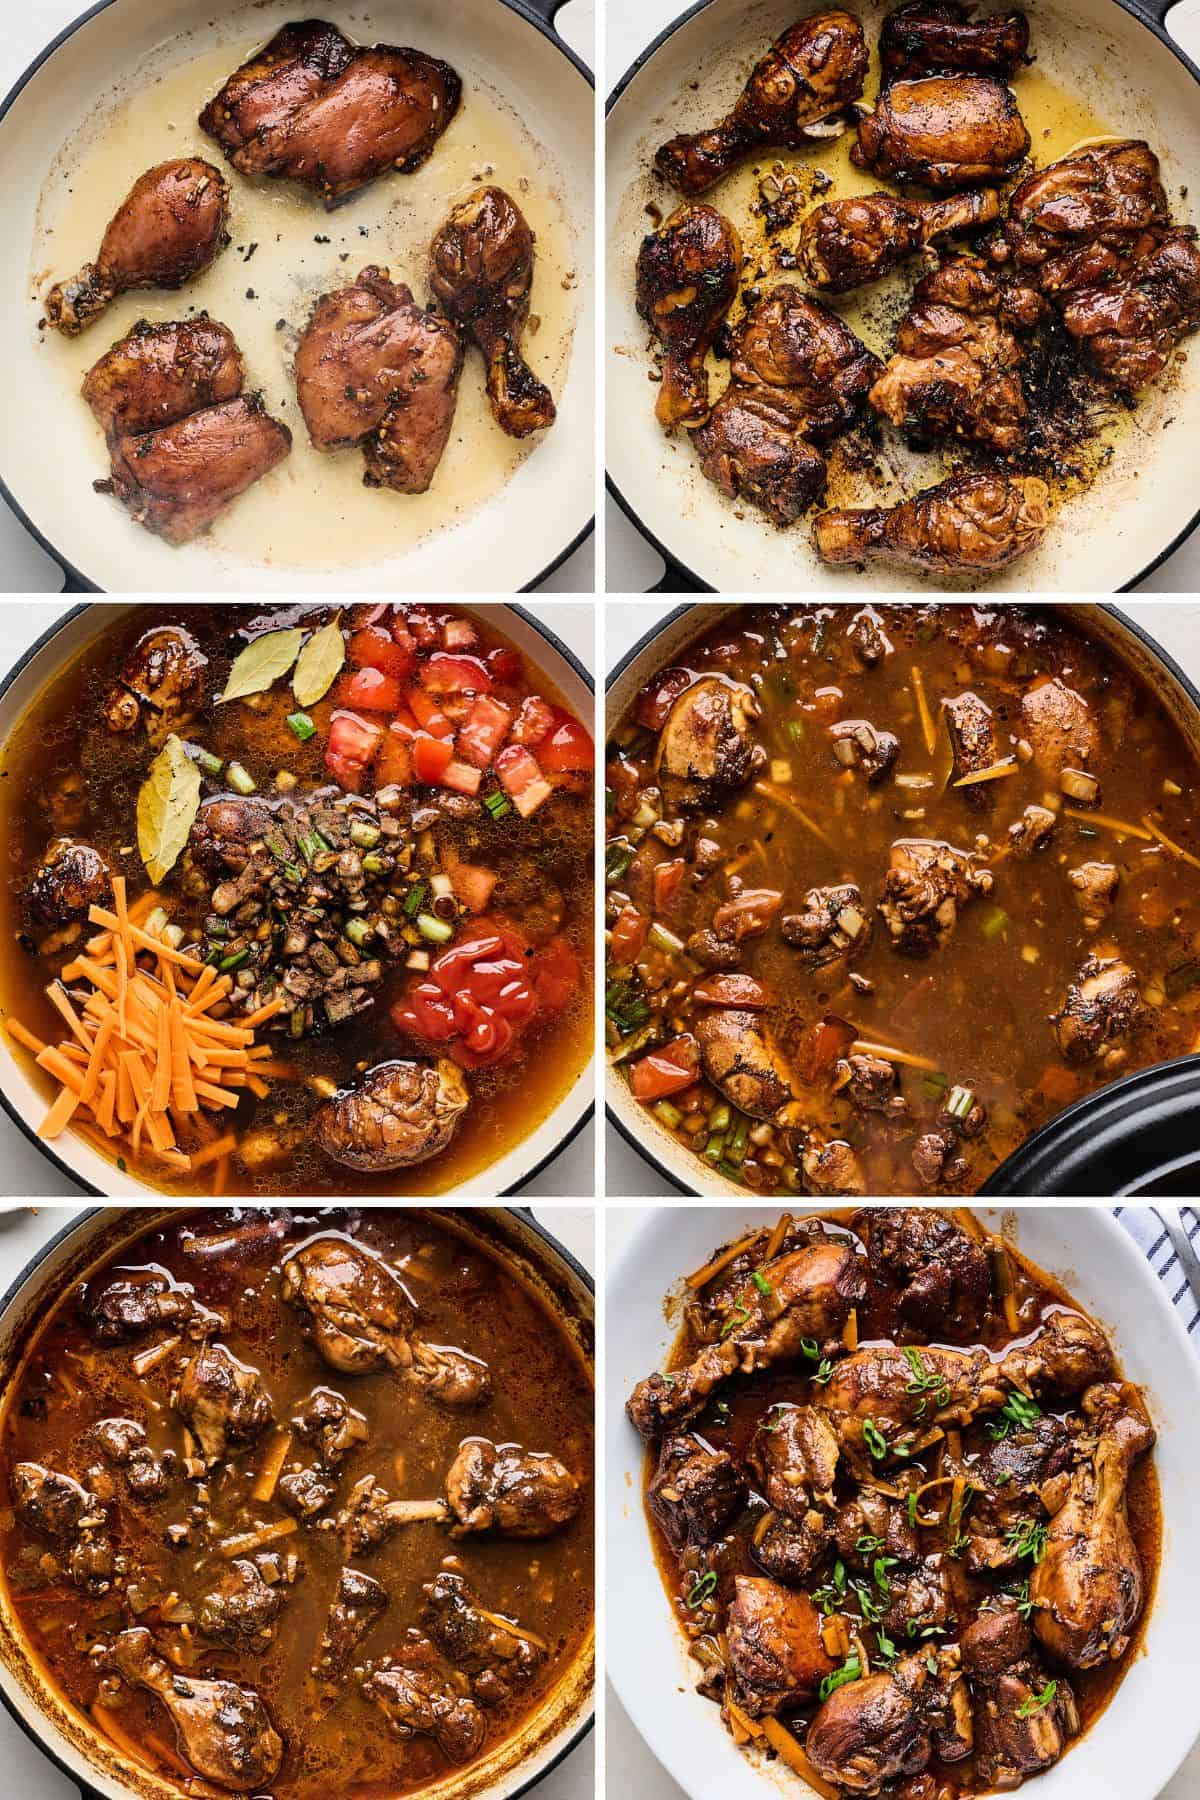 Collage of images showing the steps to make jamaican brown stew chicken, including frying the chicken in a pan, adding chicken stock and vegetables, cooking the stew, and serving it on a plate